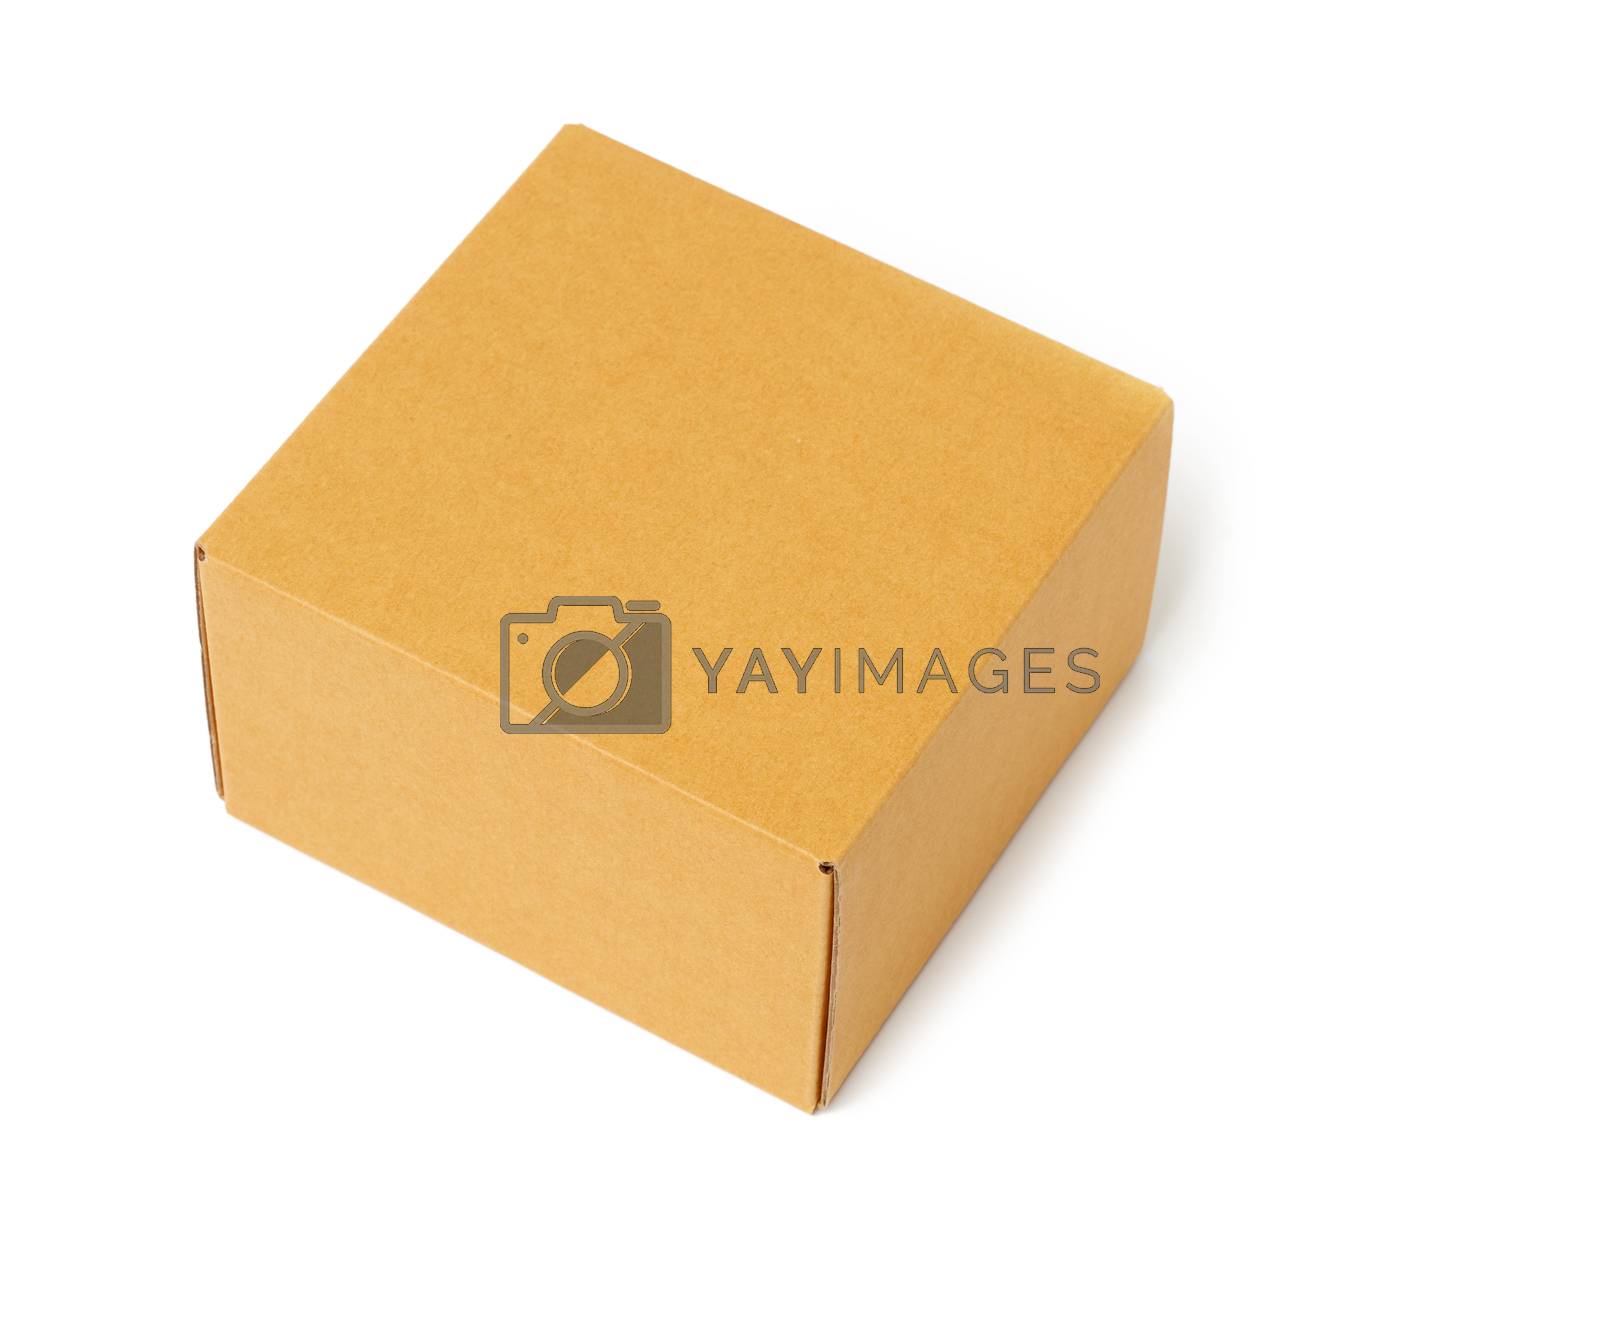 Royalty free image of square brown cardboard box isolated on white background by ndanko